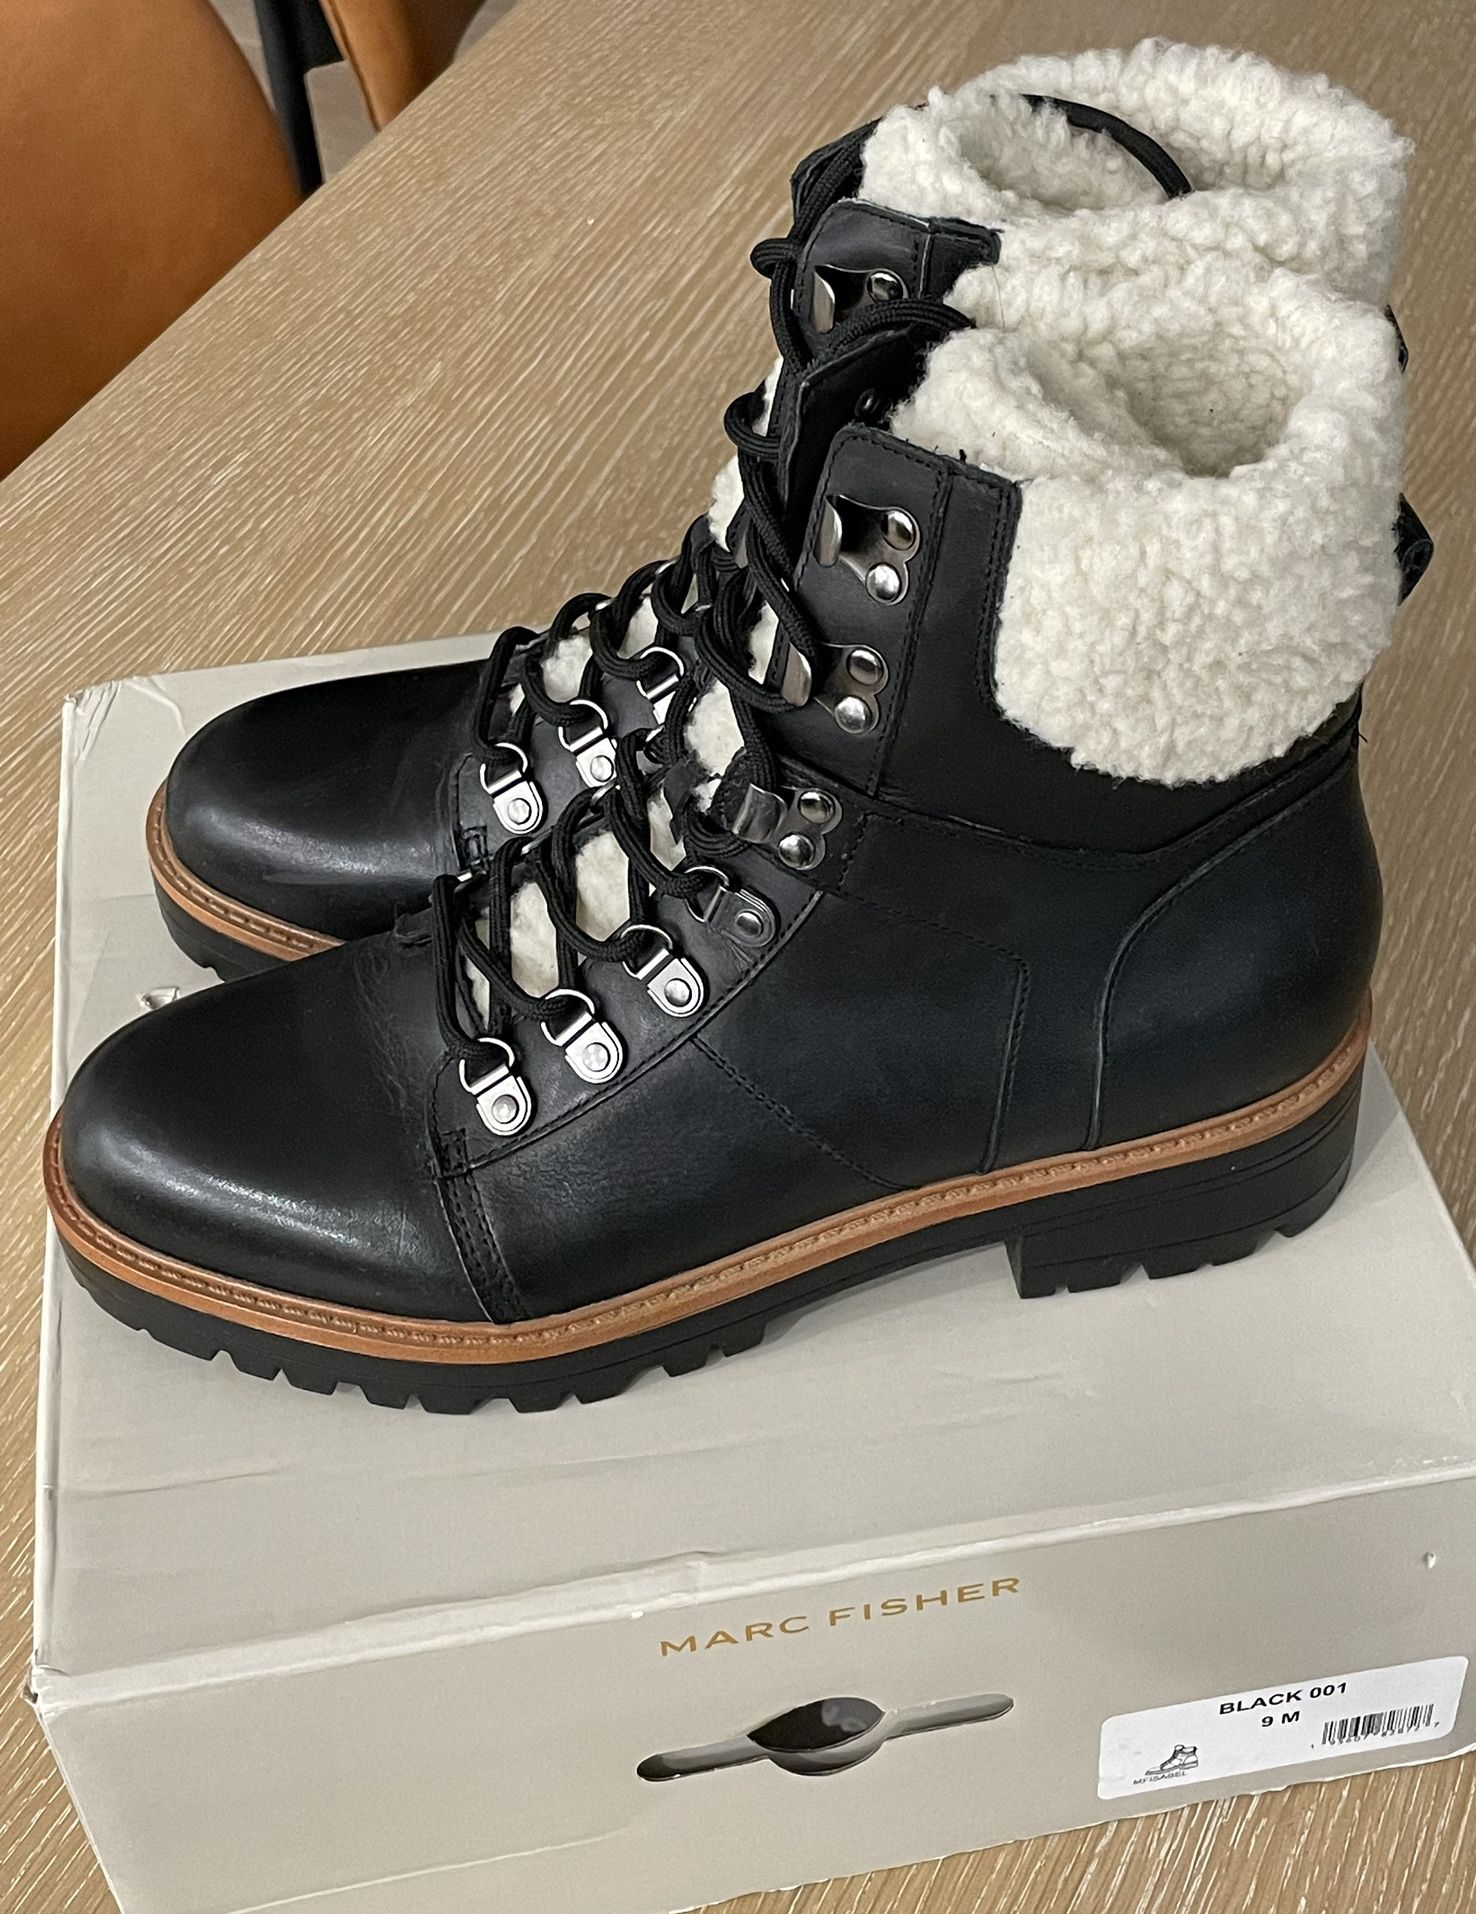 Marc Fisher Black Fur Lined Lug Sole Boots